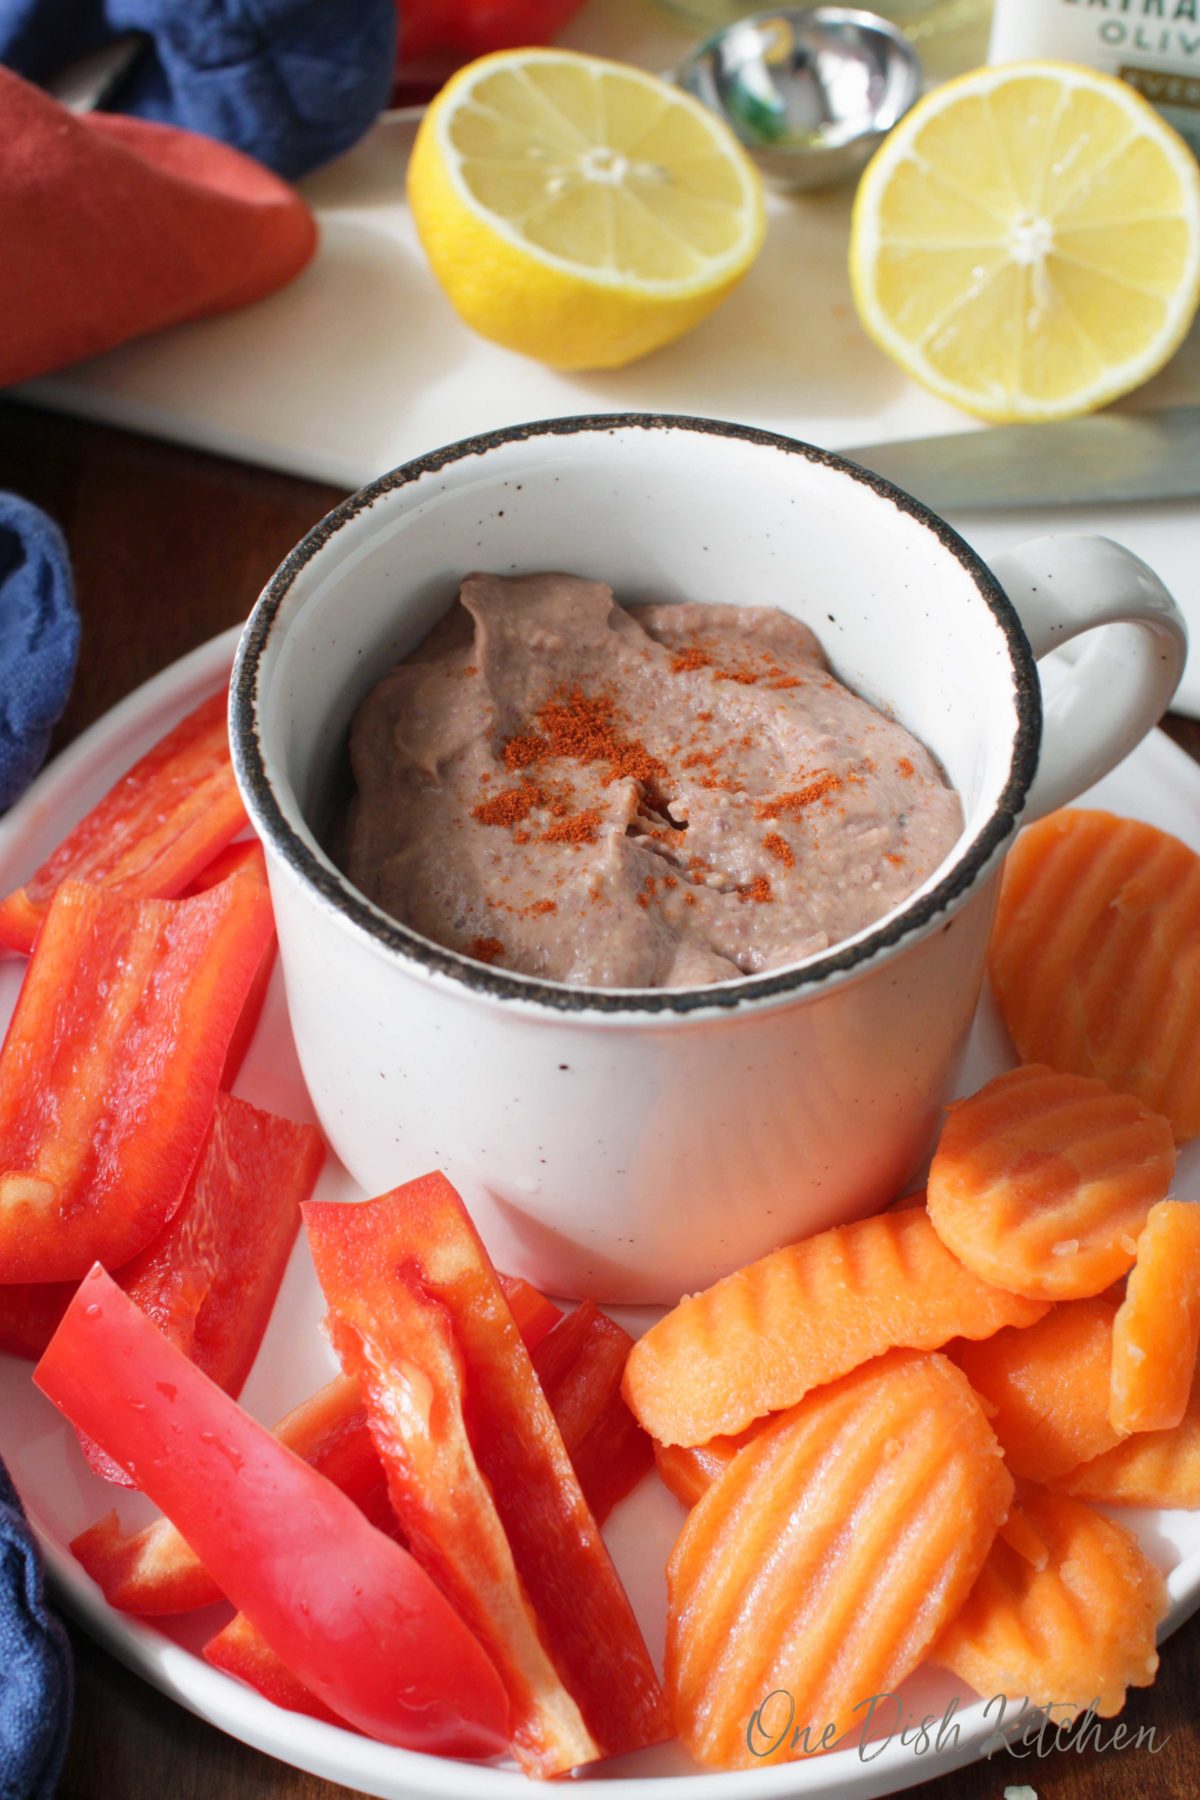 A bowl of black bean hummus plated with sliced carrots and red peppers with lemon halves in the background.